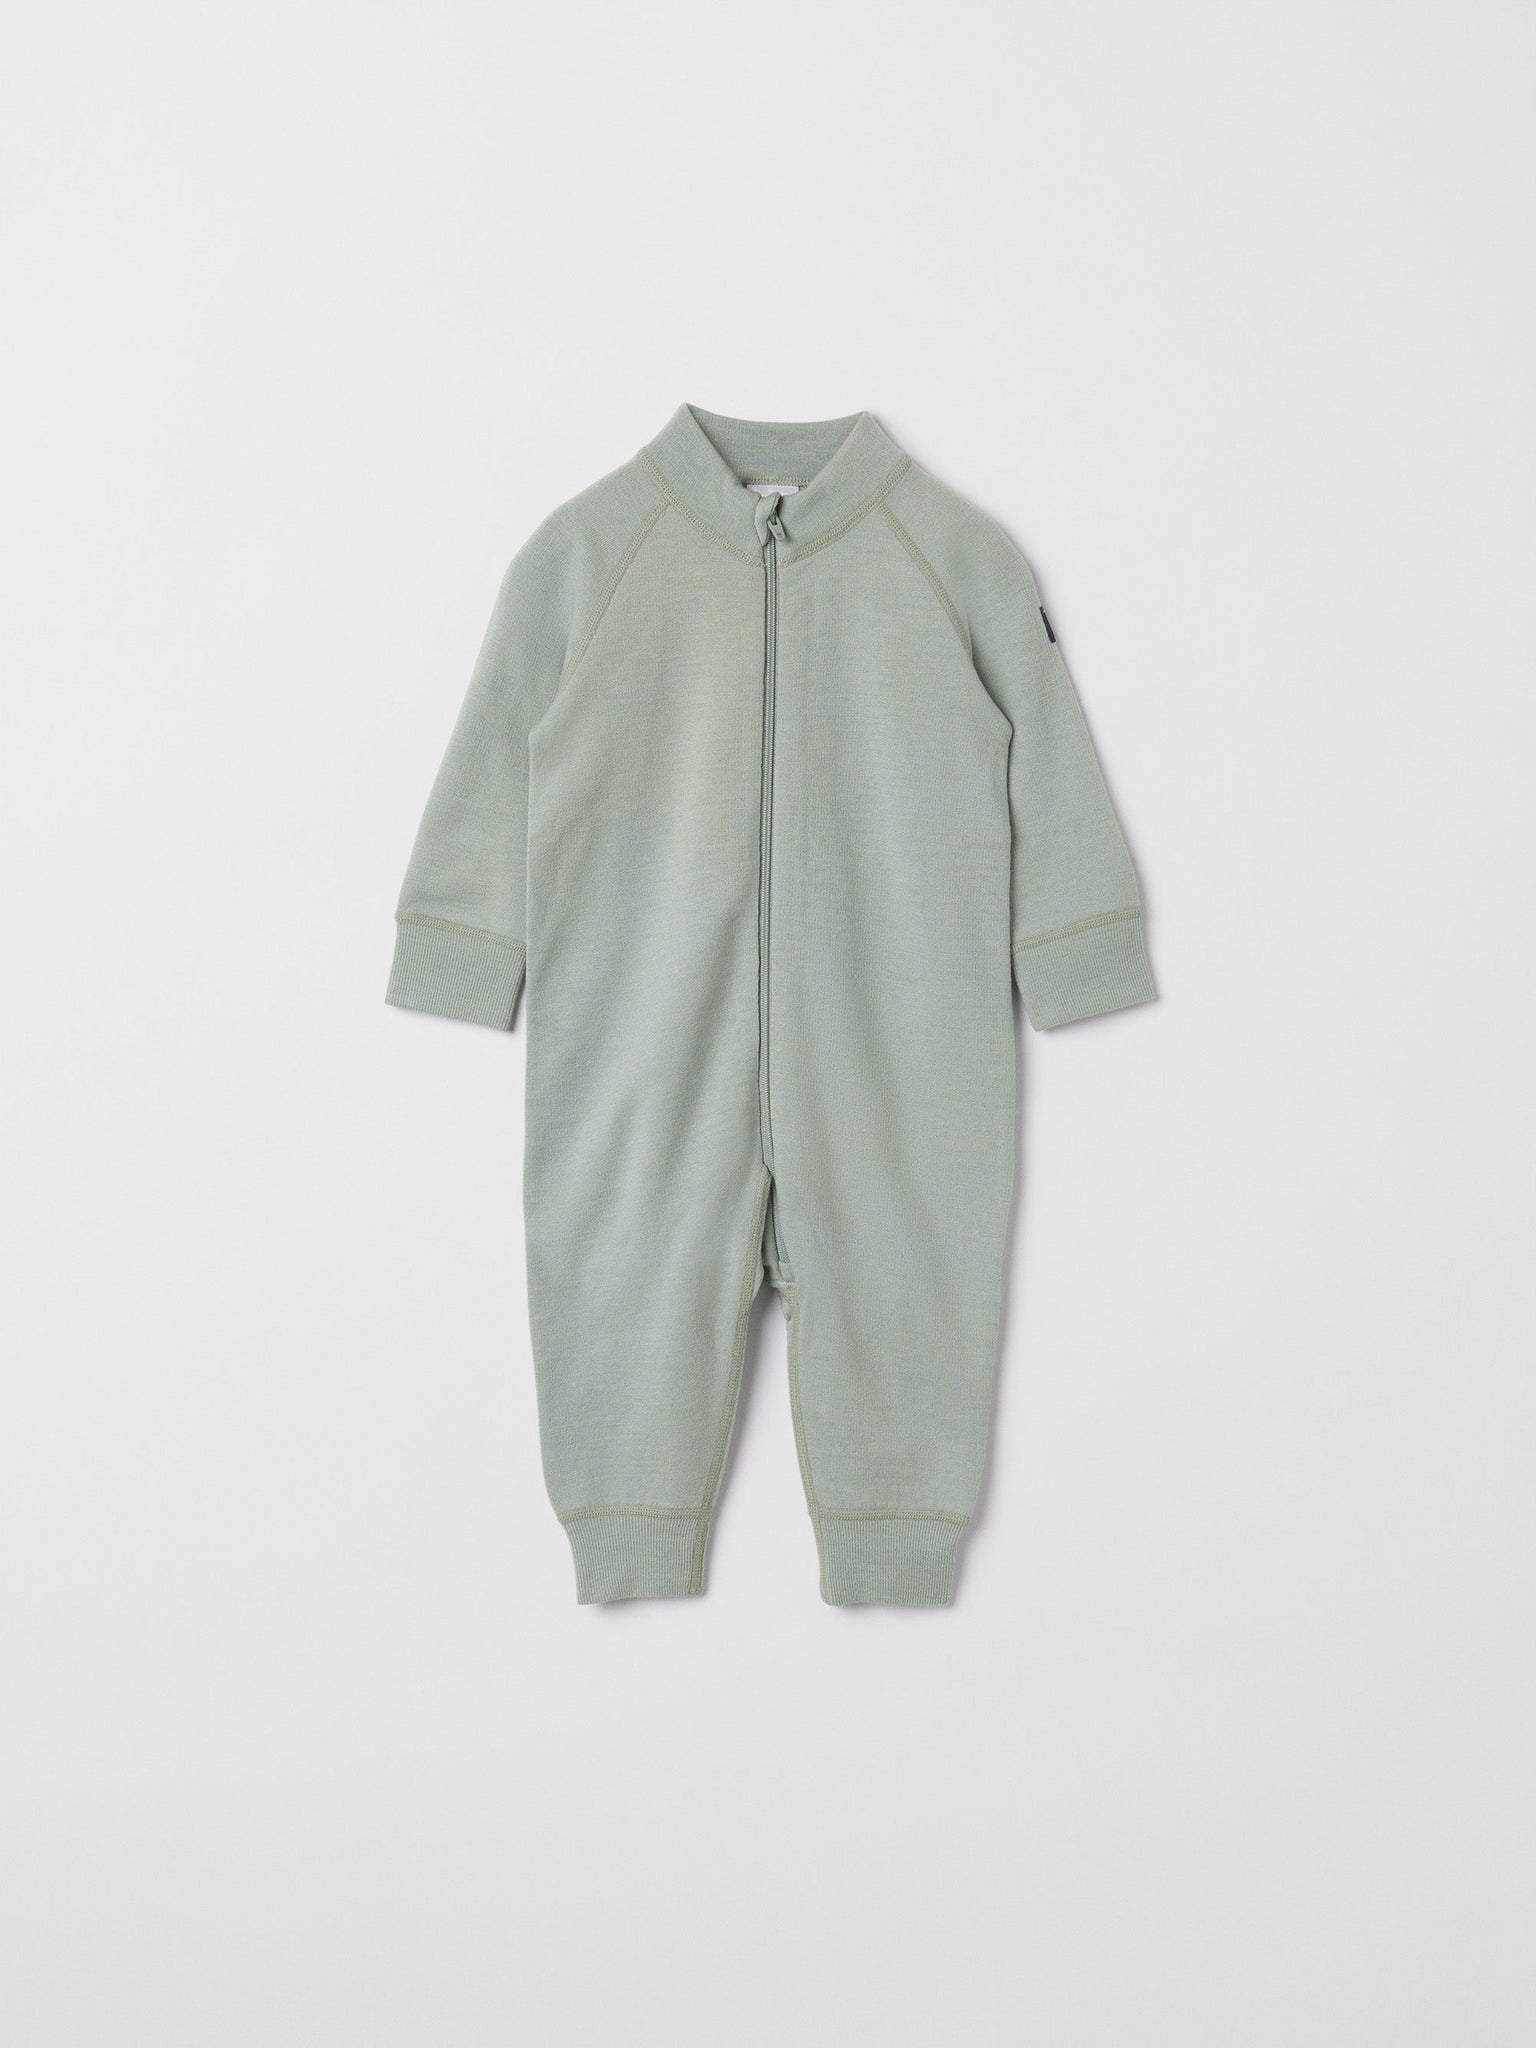 Merino Green Kids Thermal All-In-One from the Polarn O. Pyret outerwear collection. Kids outerwear made from sustainably source materials